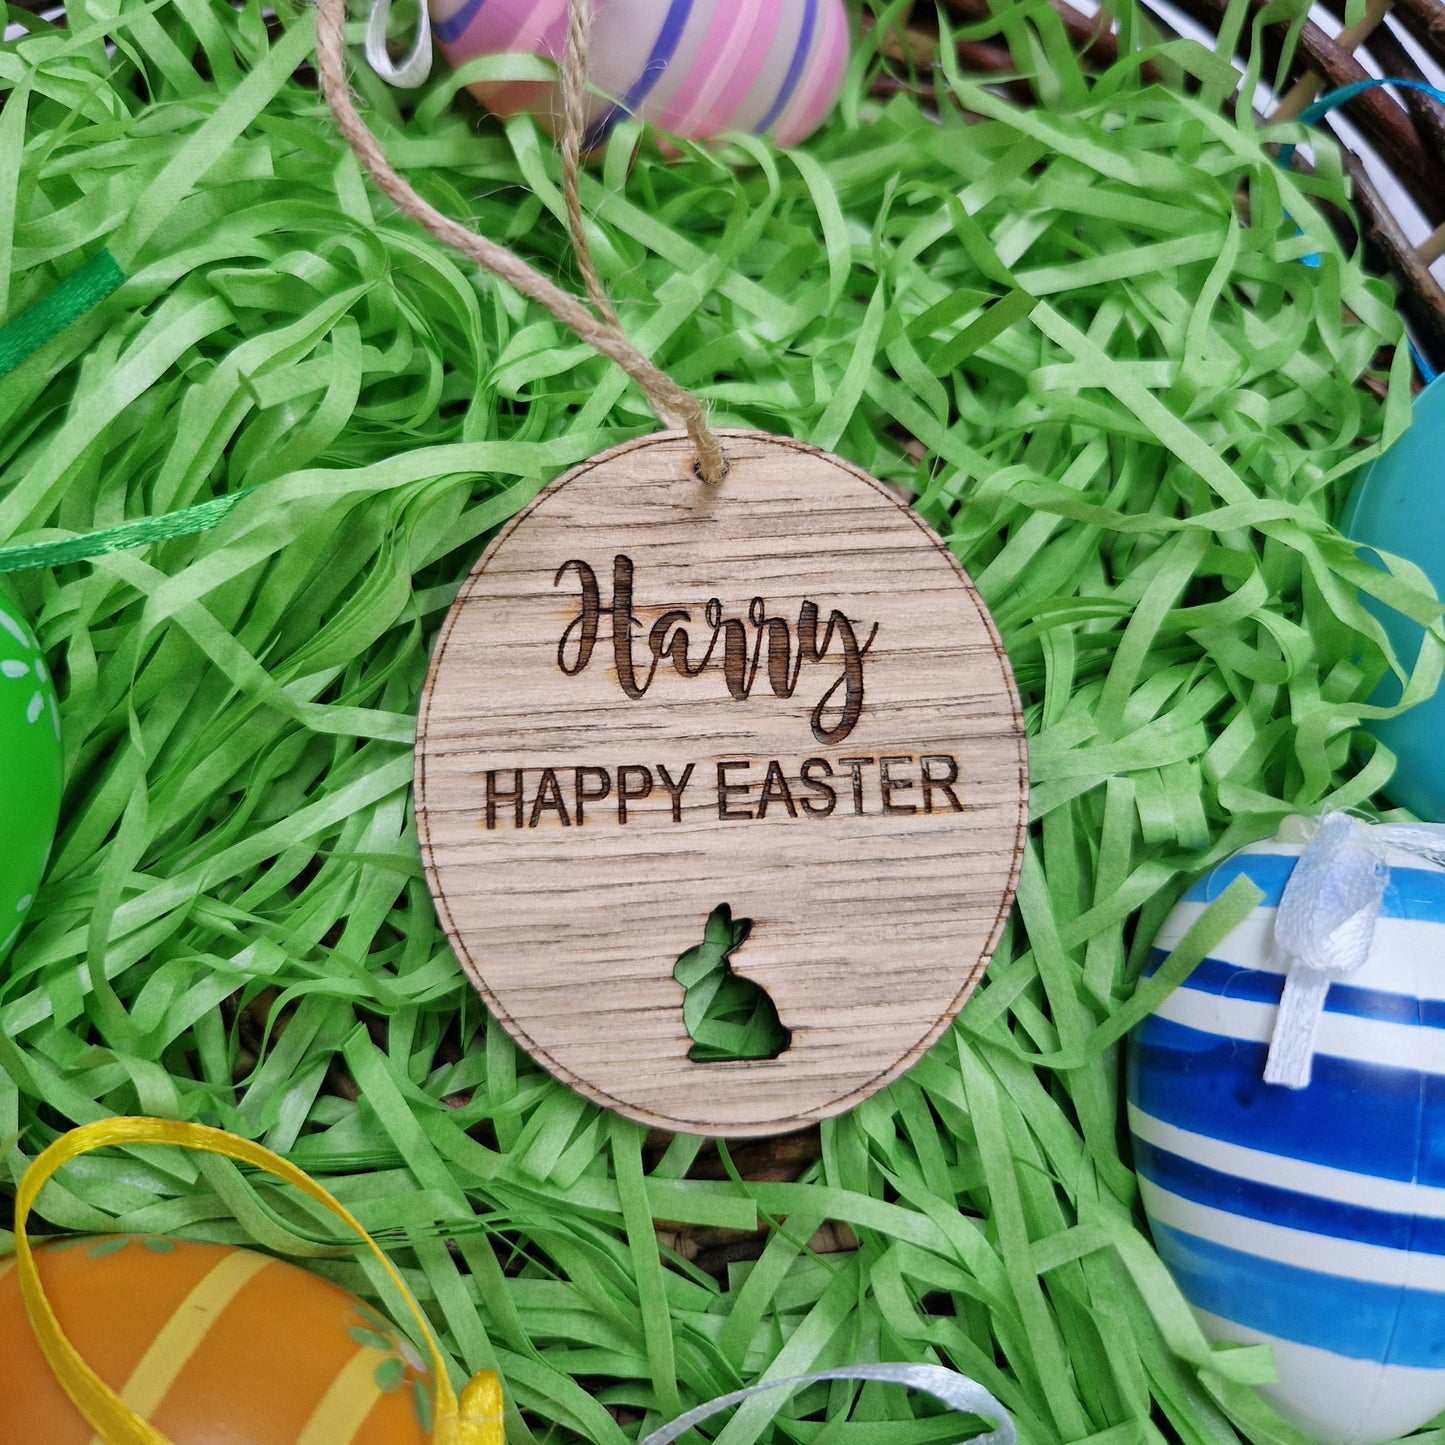 Happy Easter Personalised Wooden Egg Decoration